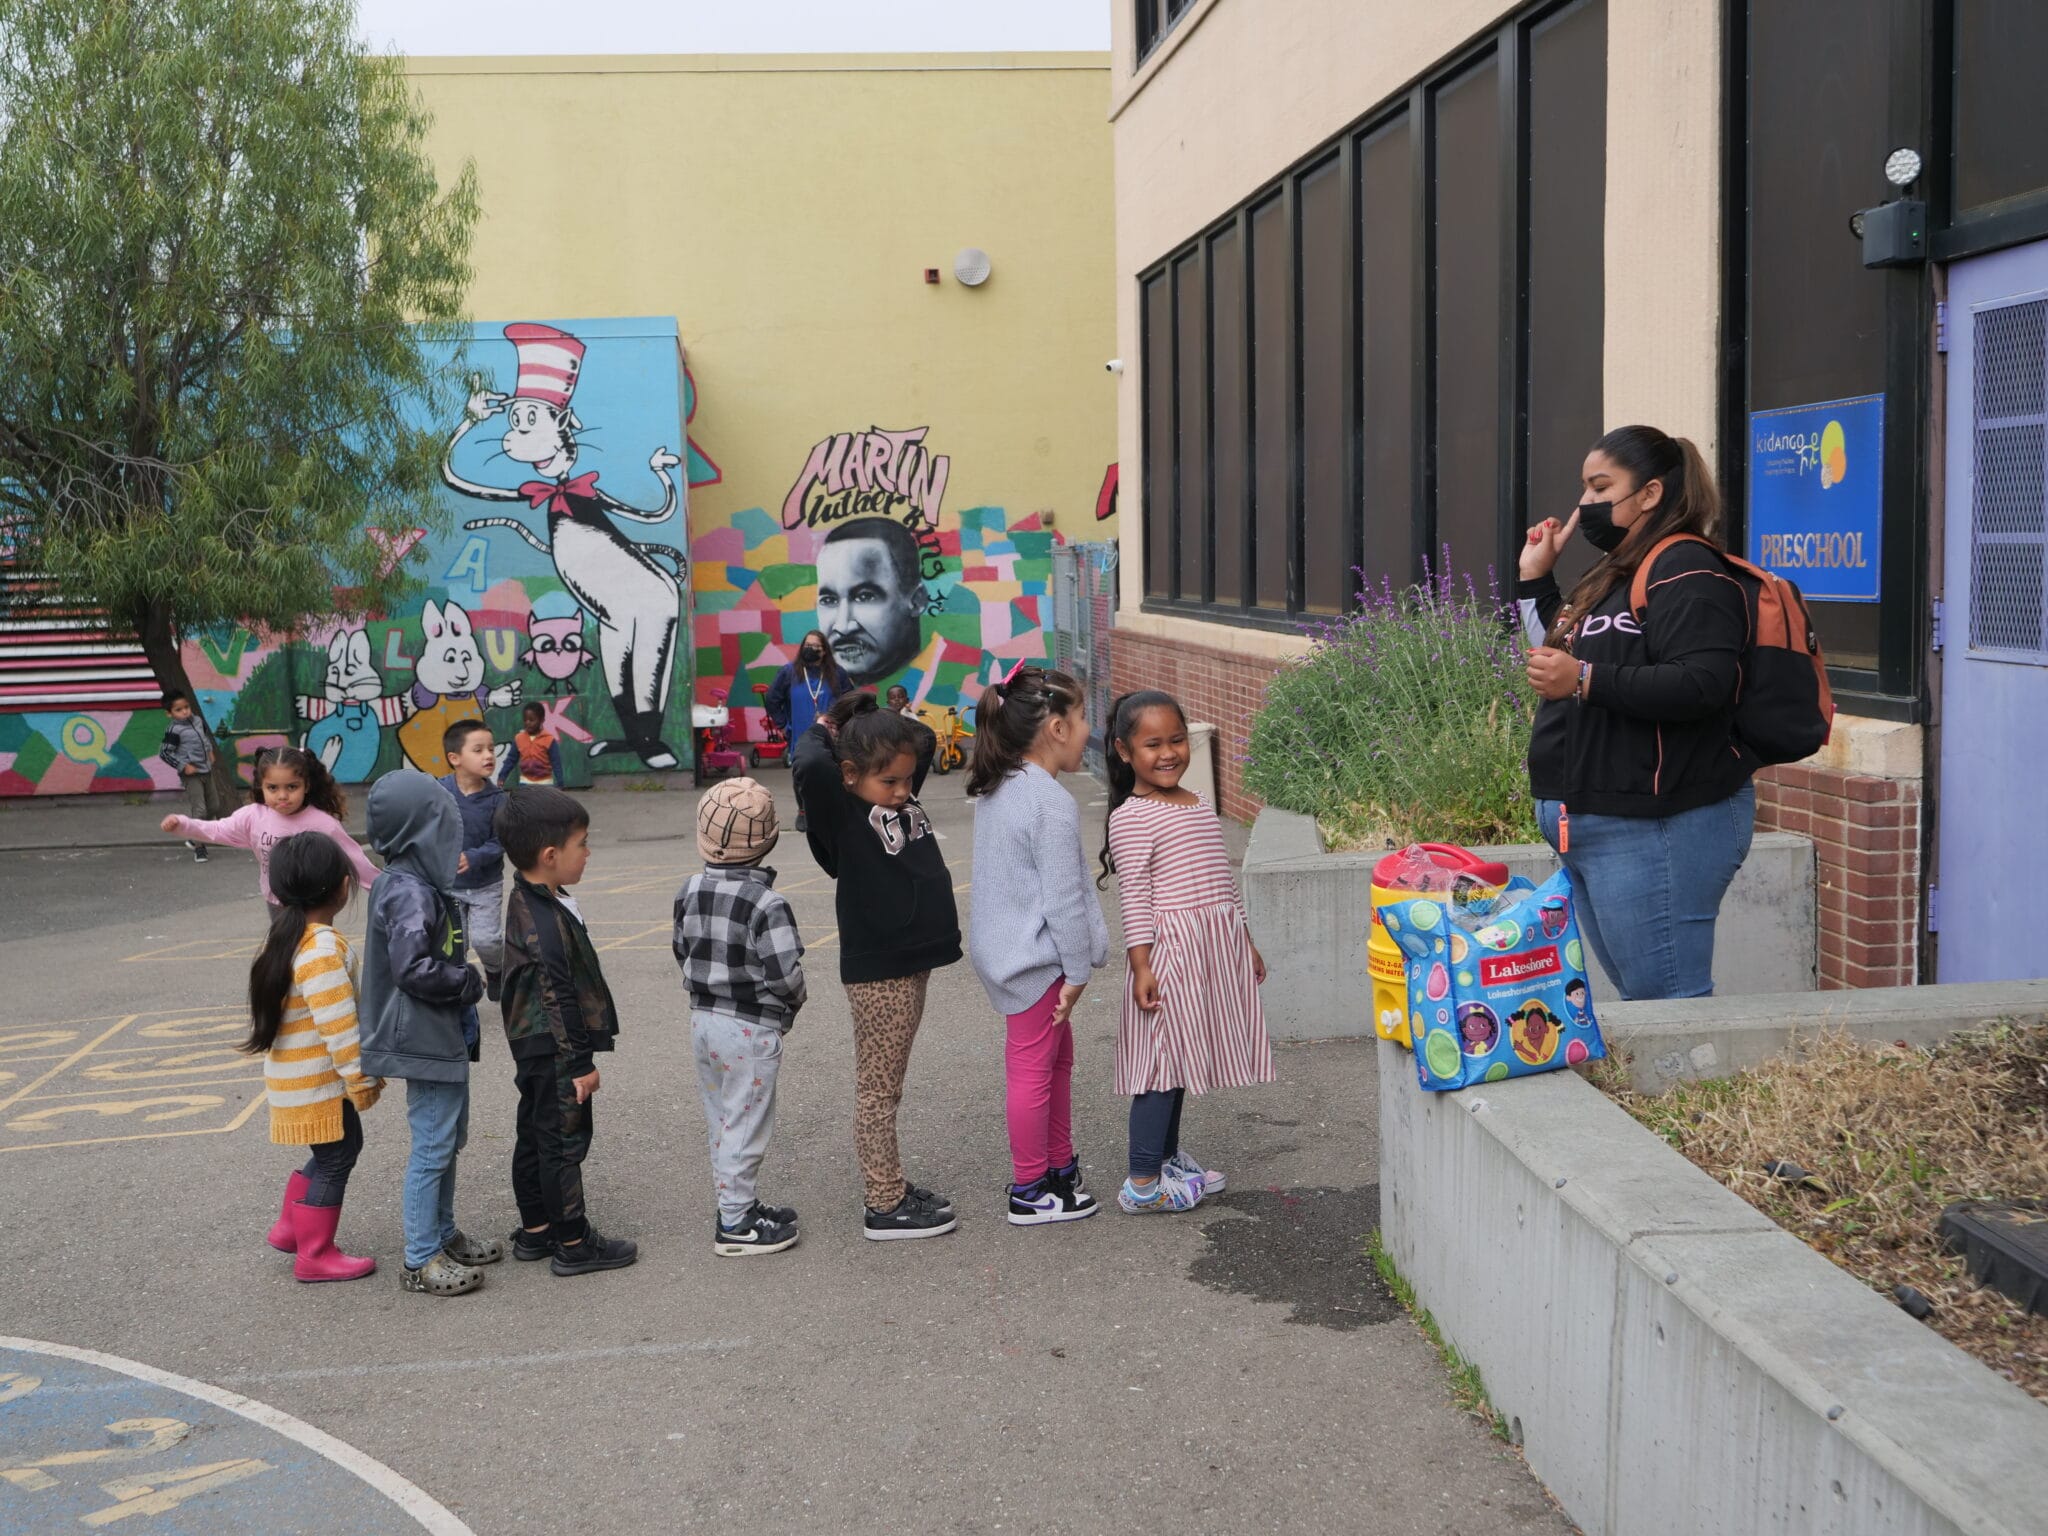 A teacher wearing a backpack gives instructions to her preschool students as they line up to go inside.